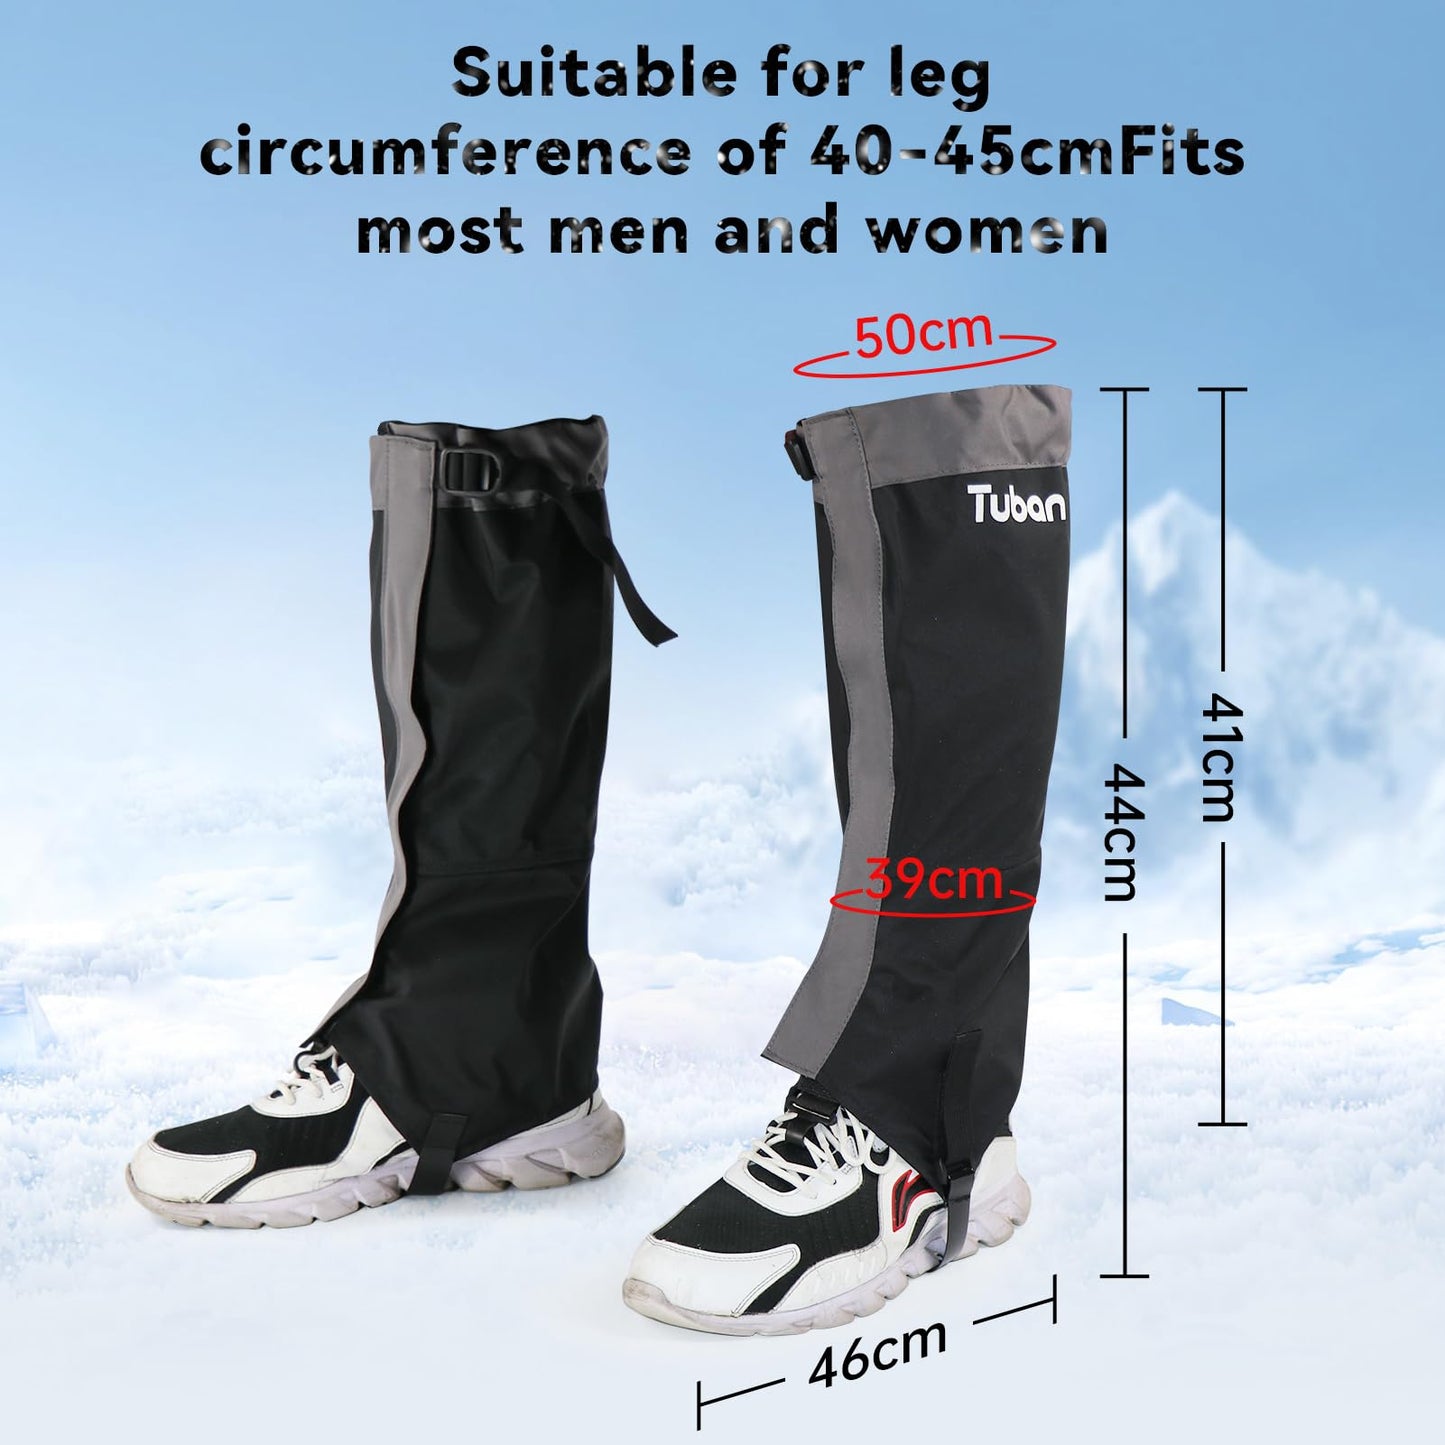 Hzdyopk Leg Gaiters for Hiking – Waterproof and Adjustable Snow Boot Gaiters, One Size Fits Men and Women for Walking, Hunting, Mountain Climbing and Snowshoeing